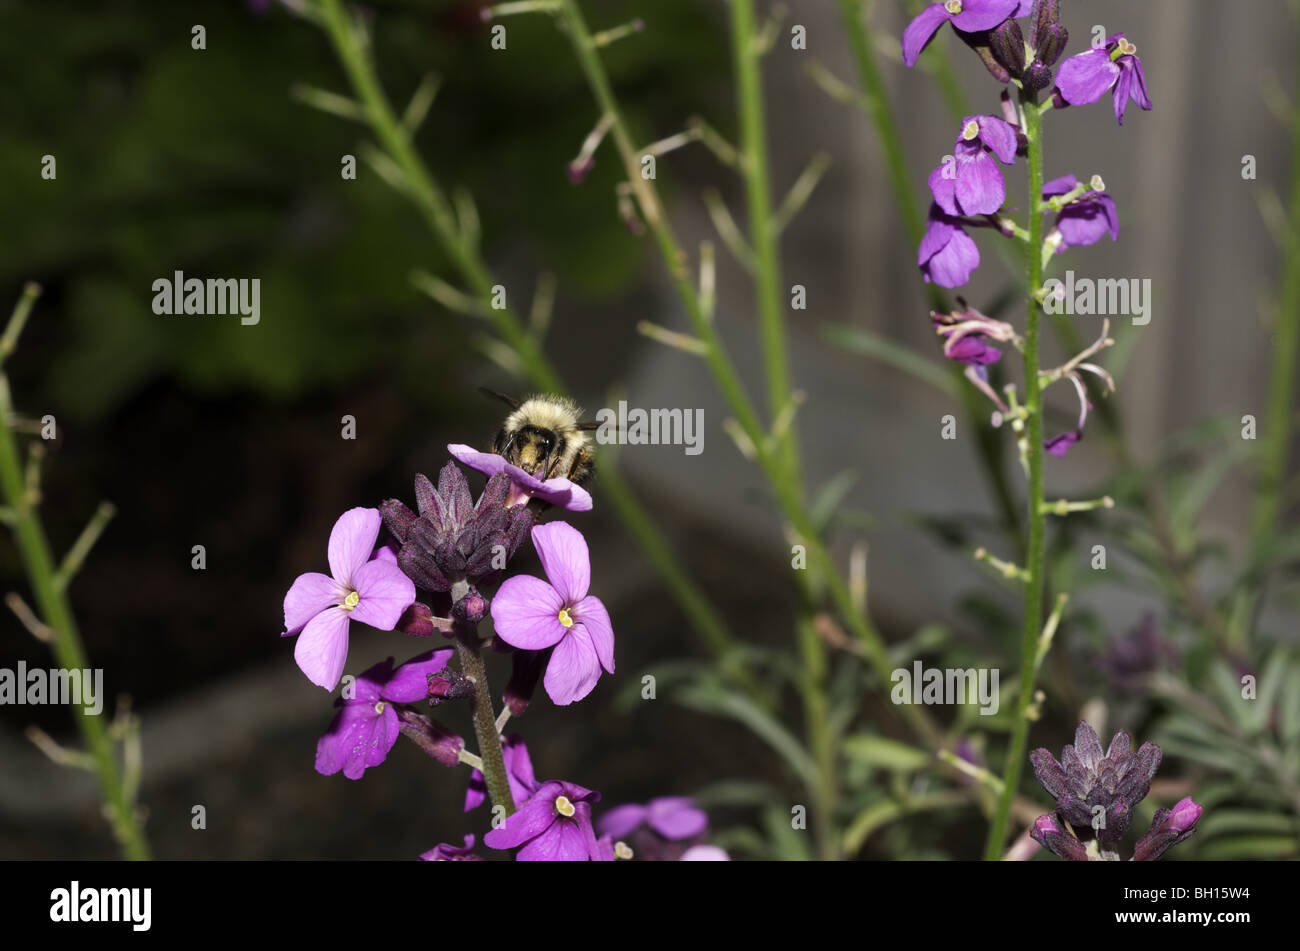 Bee on purple flower with face covered in pollen Stock Photo